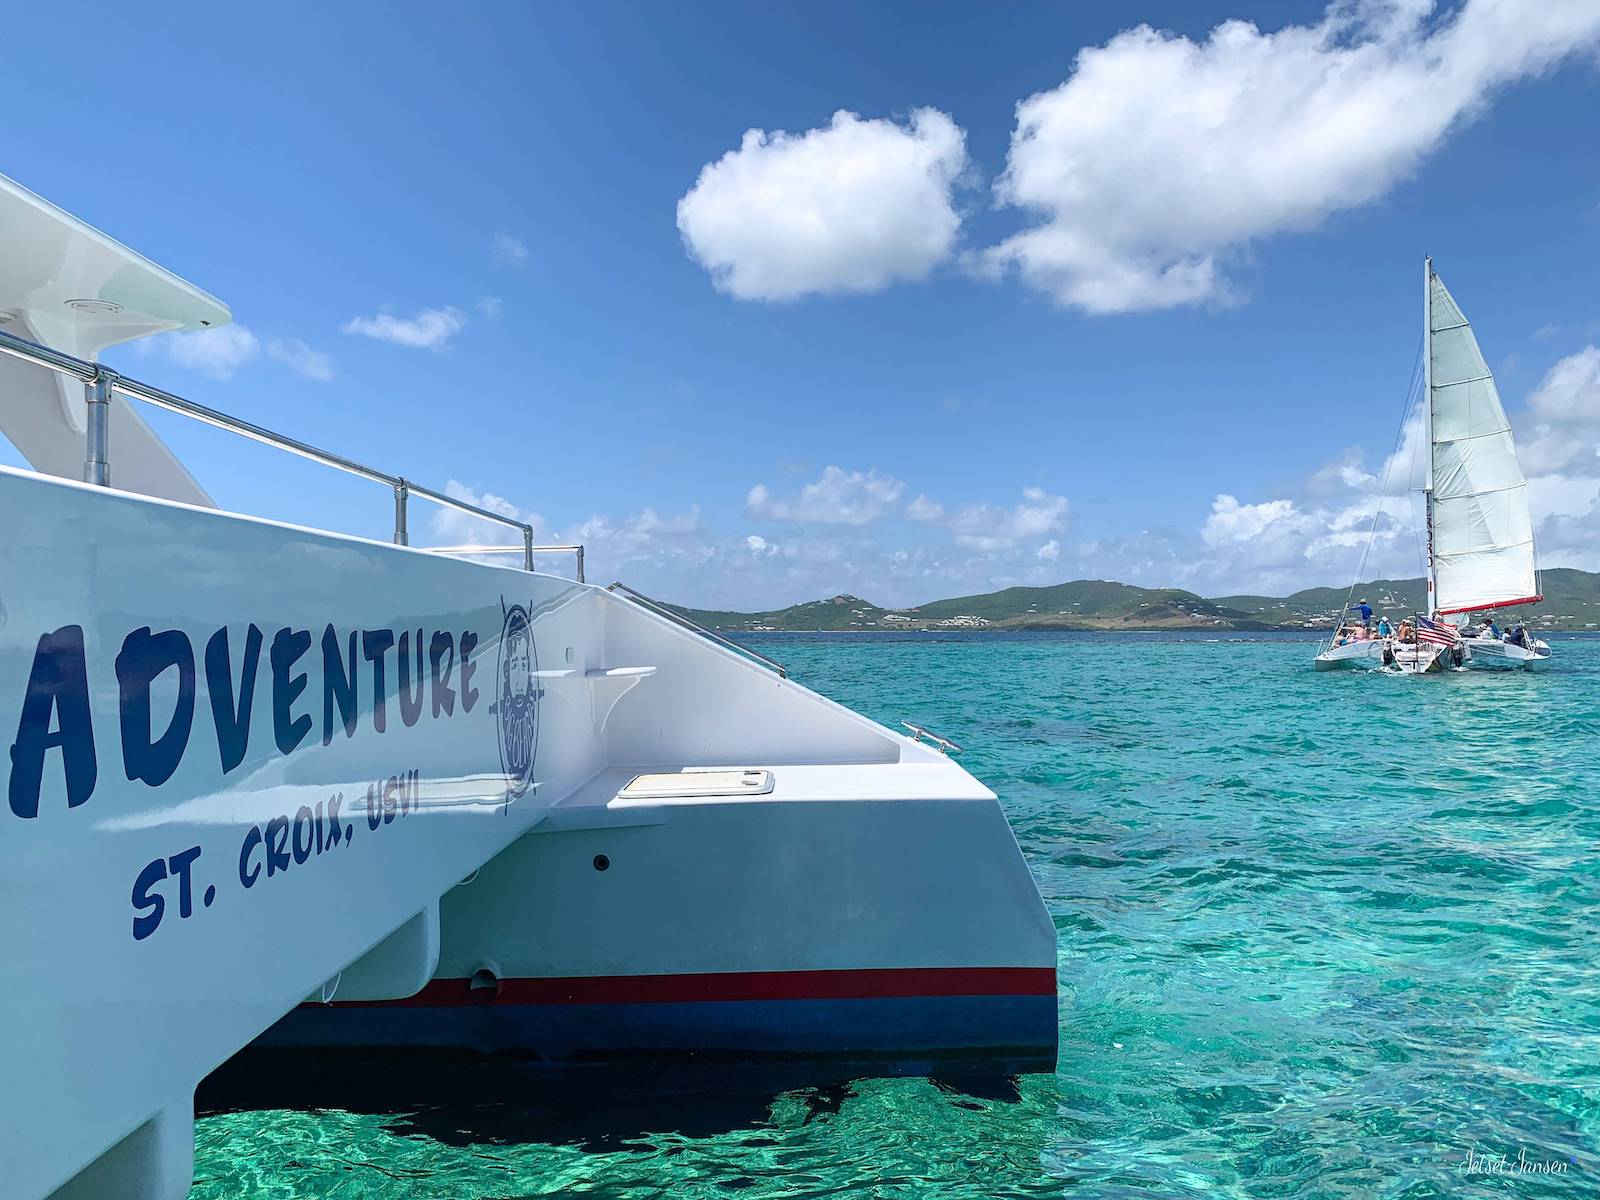 Our catamaran out in the Caribbean.